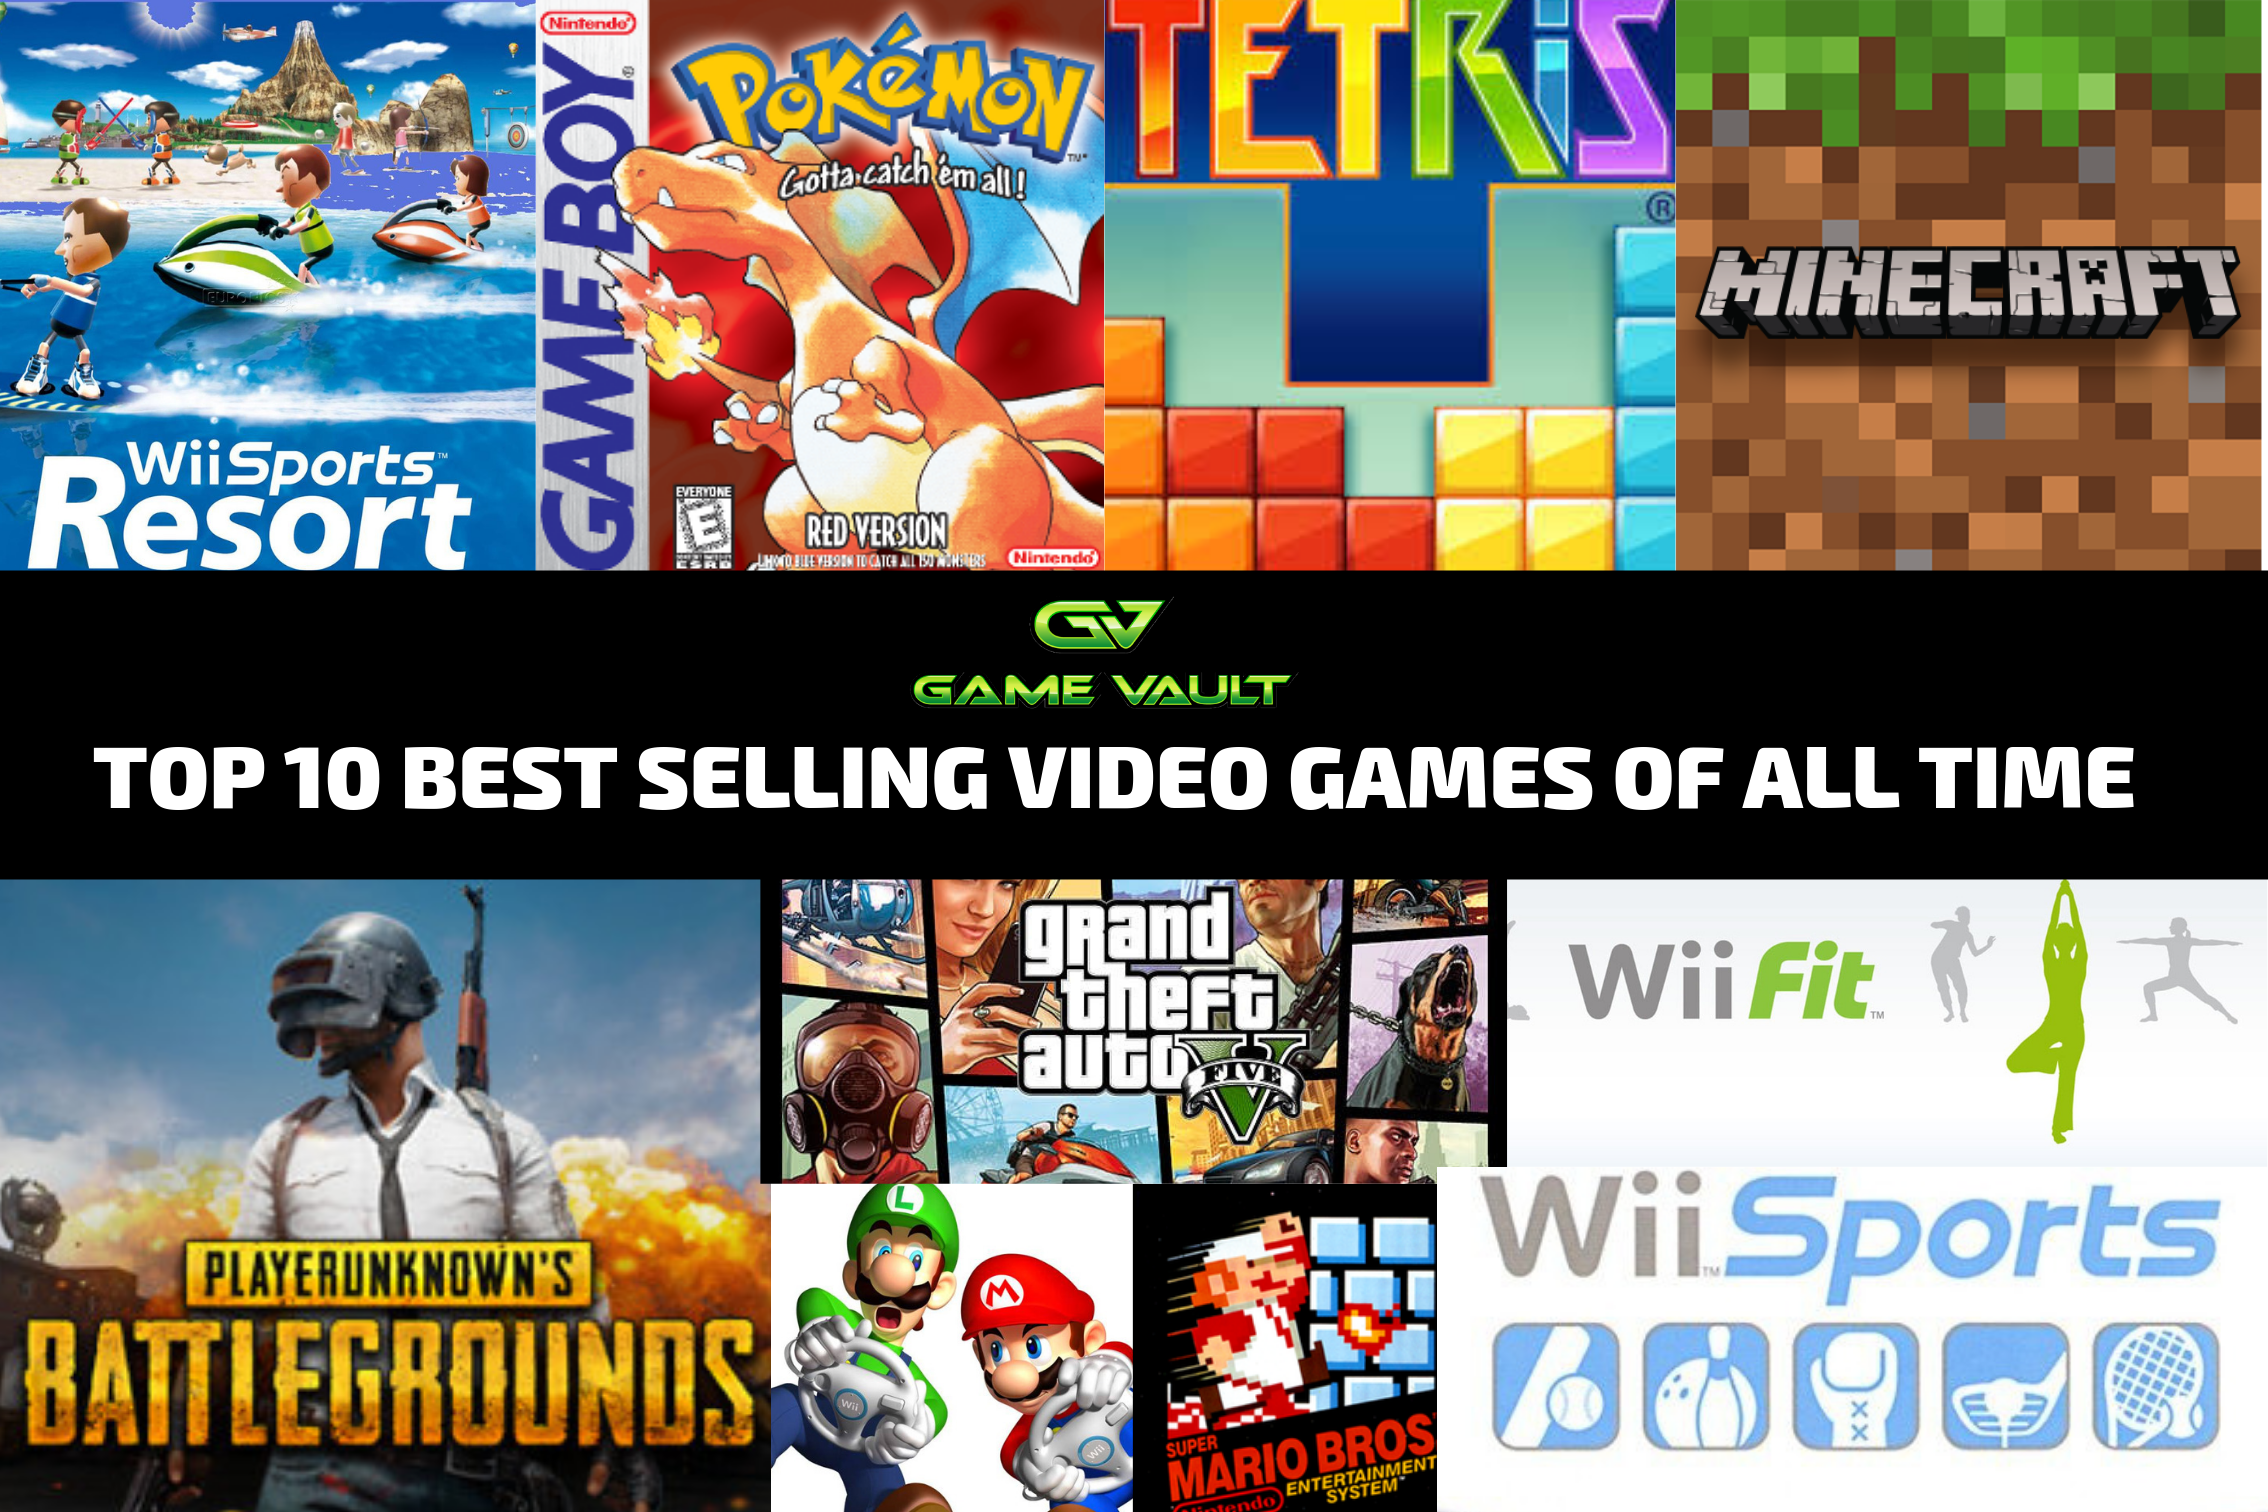 Top 10 Best-Selling Retro Games of All Time